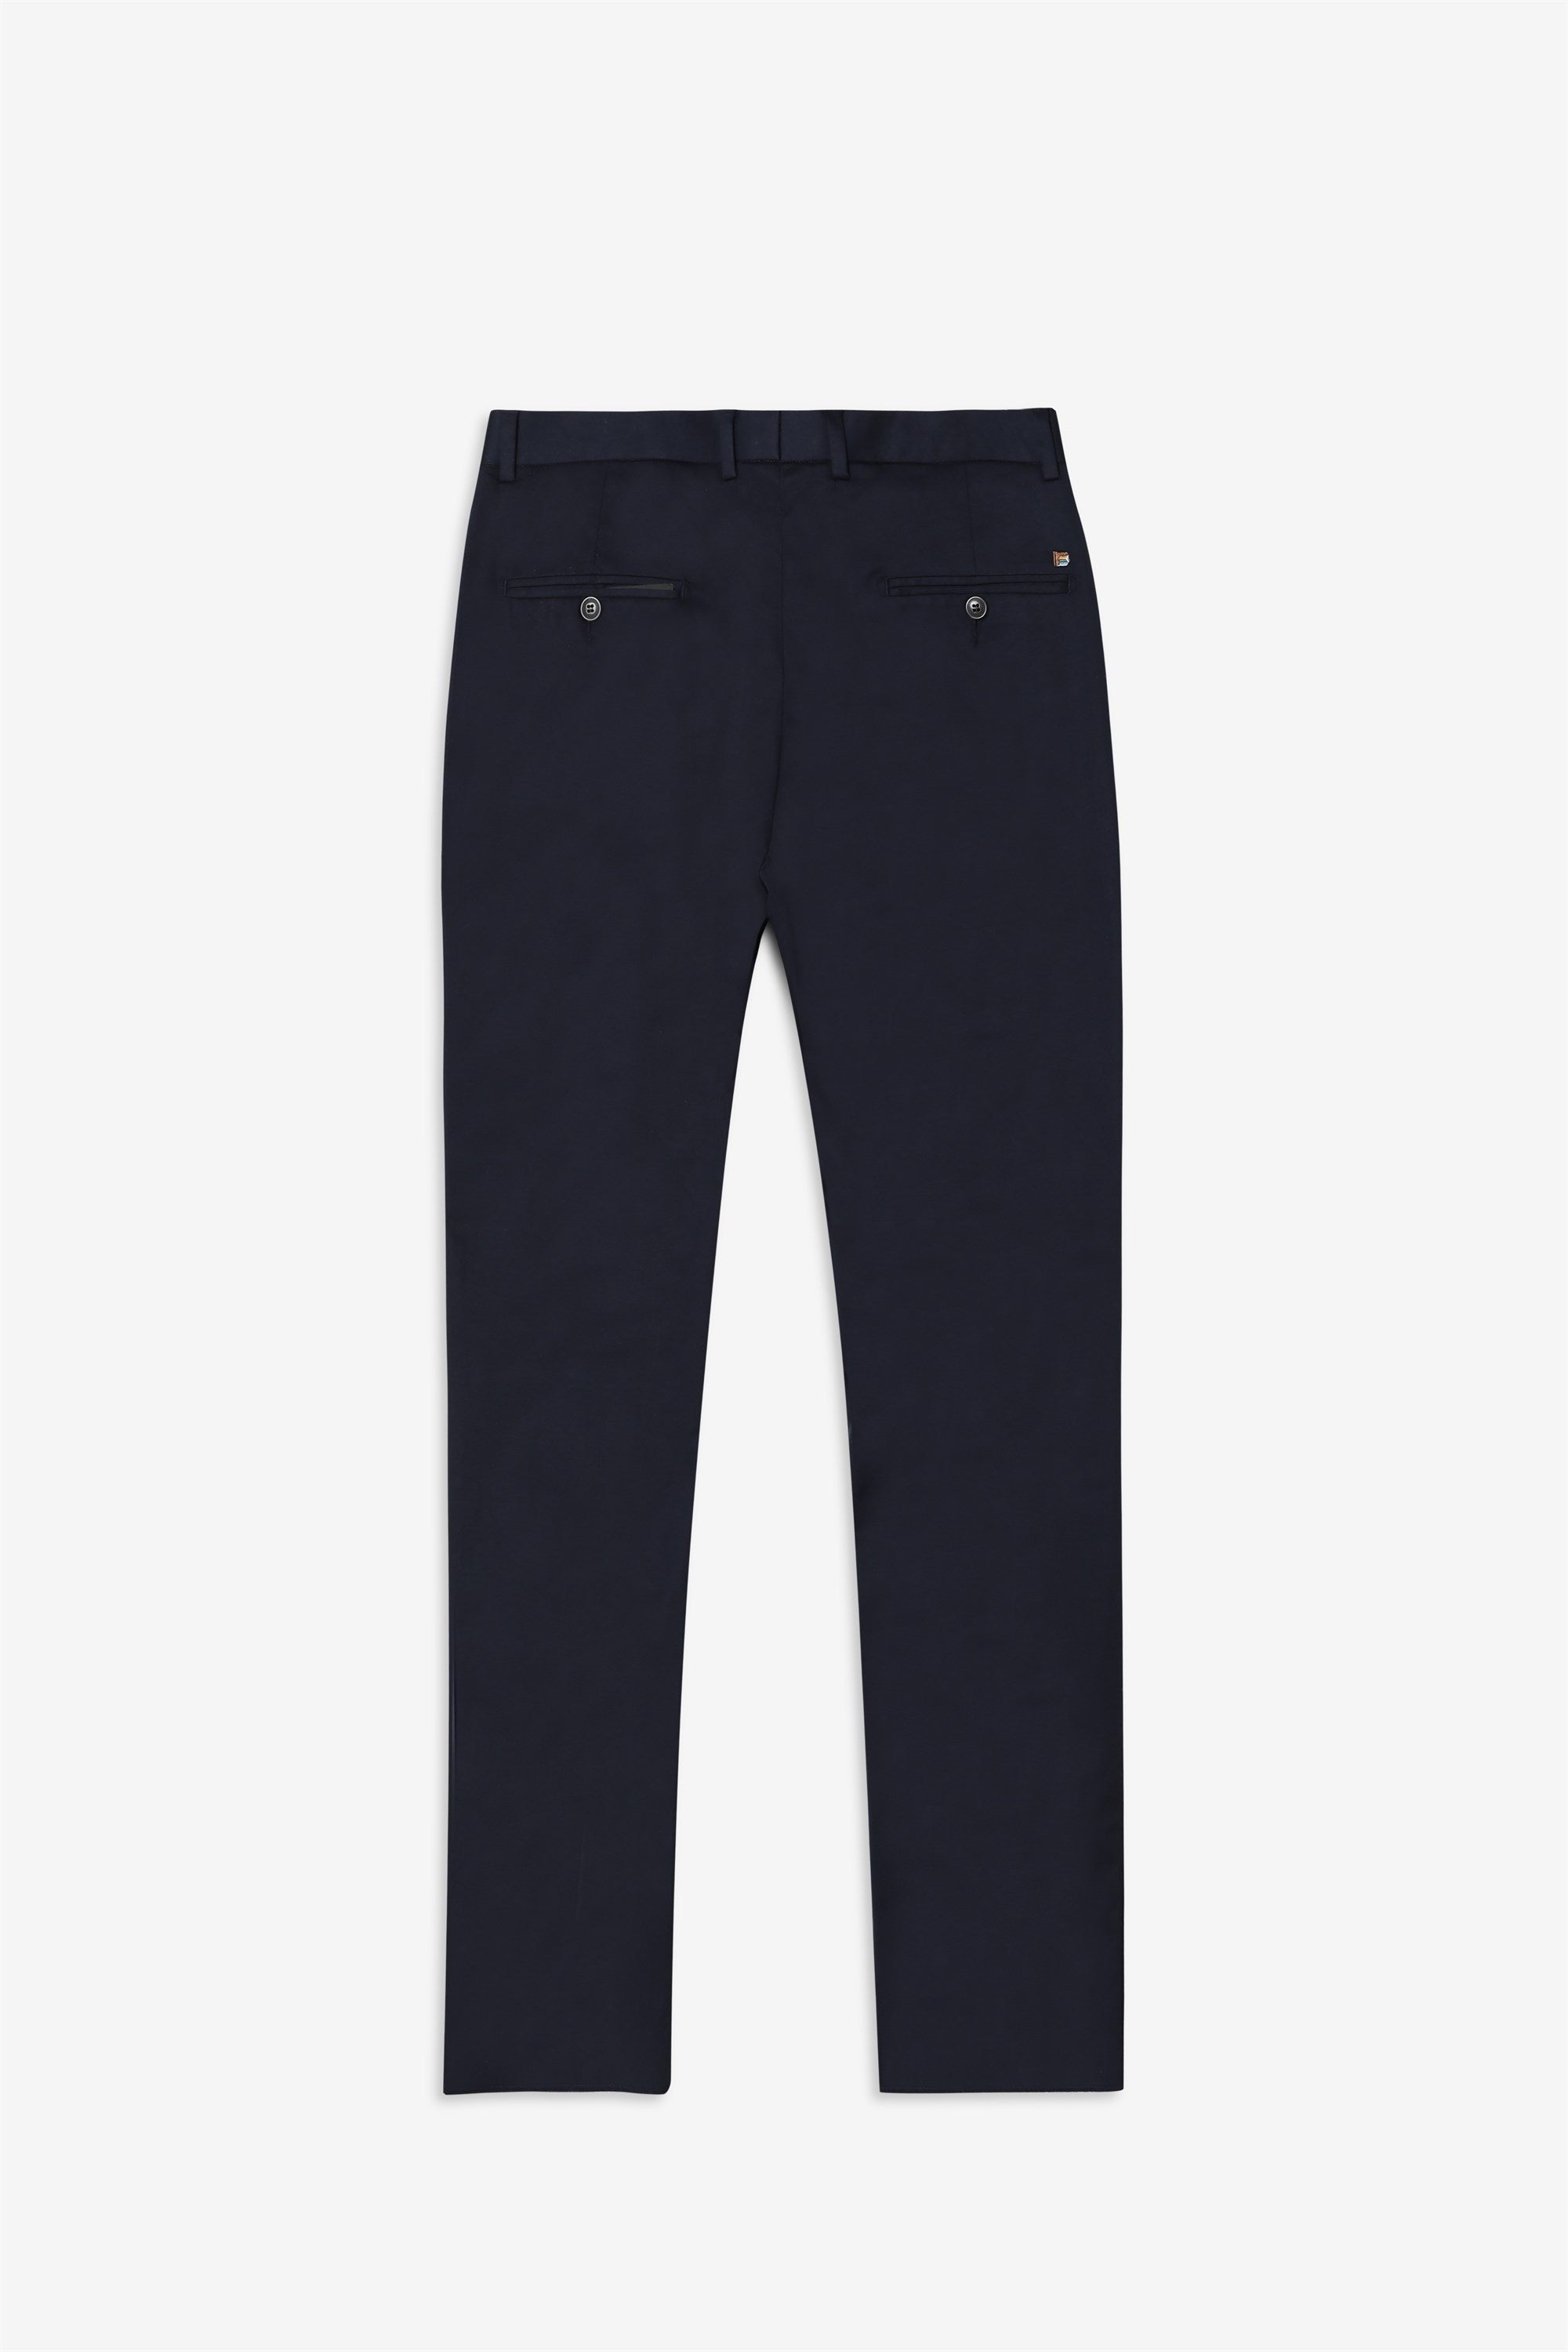 Bare Brown Stretch Slim Fit Cotton Trousers - Navy